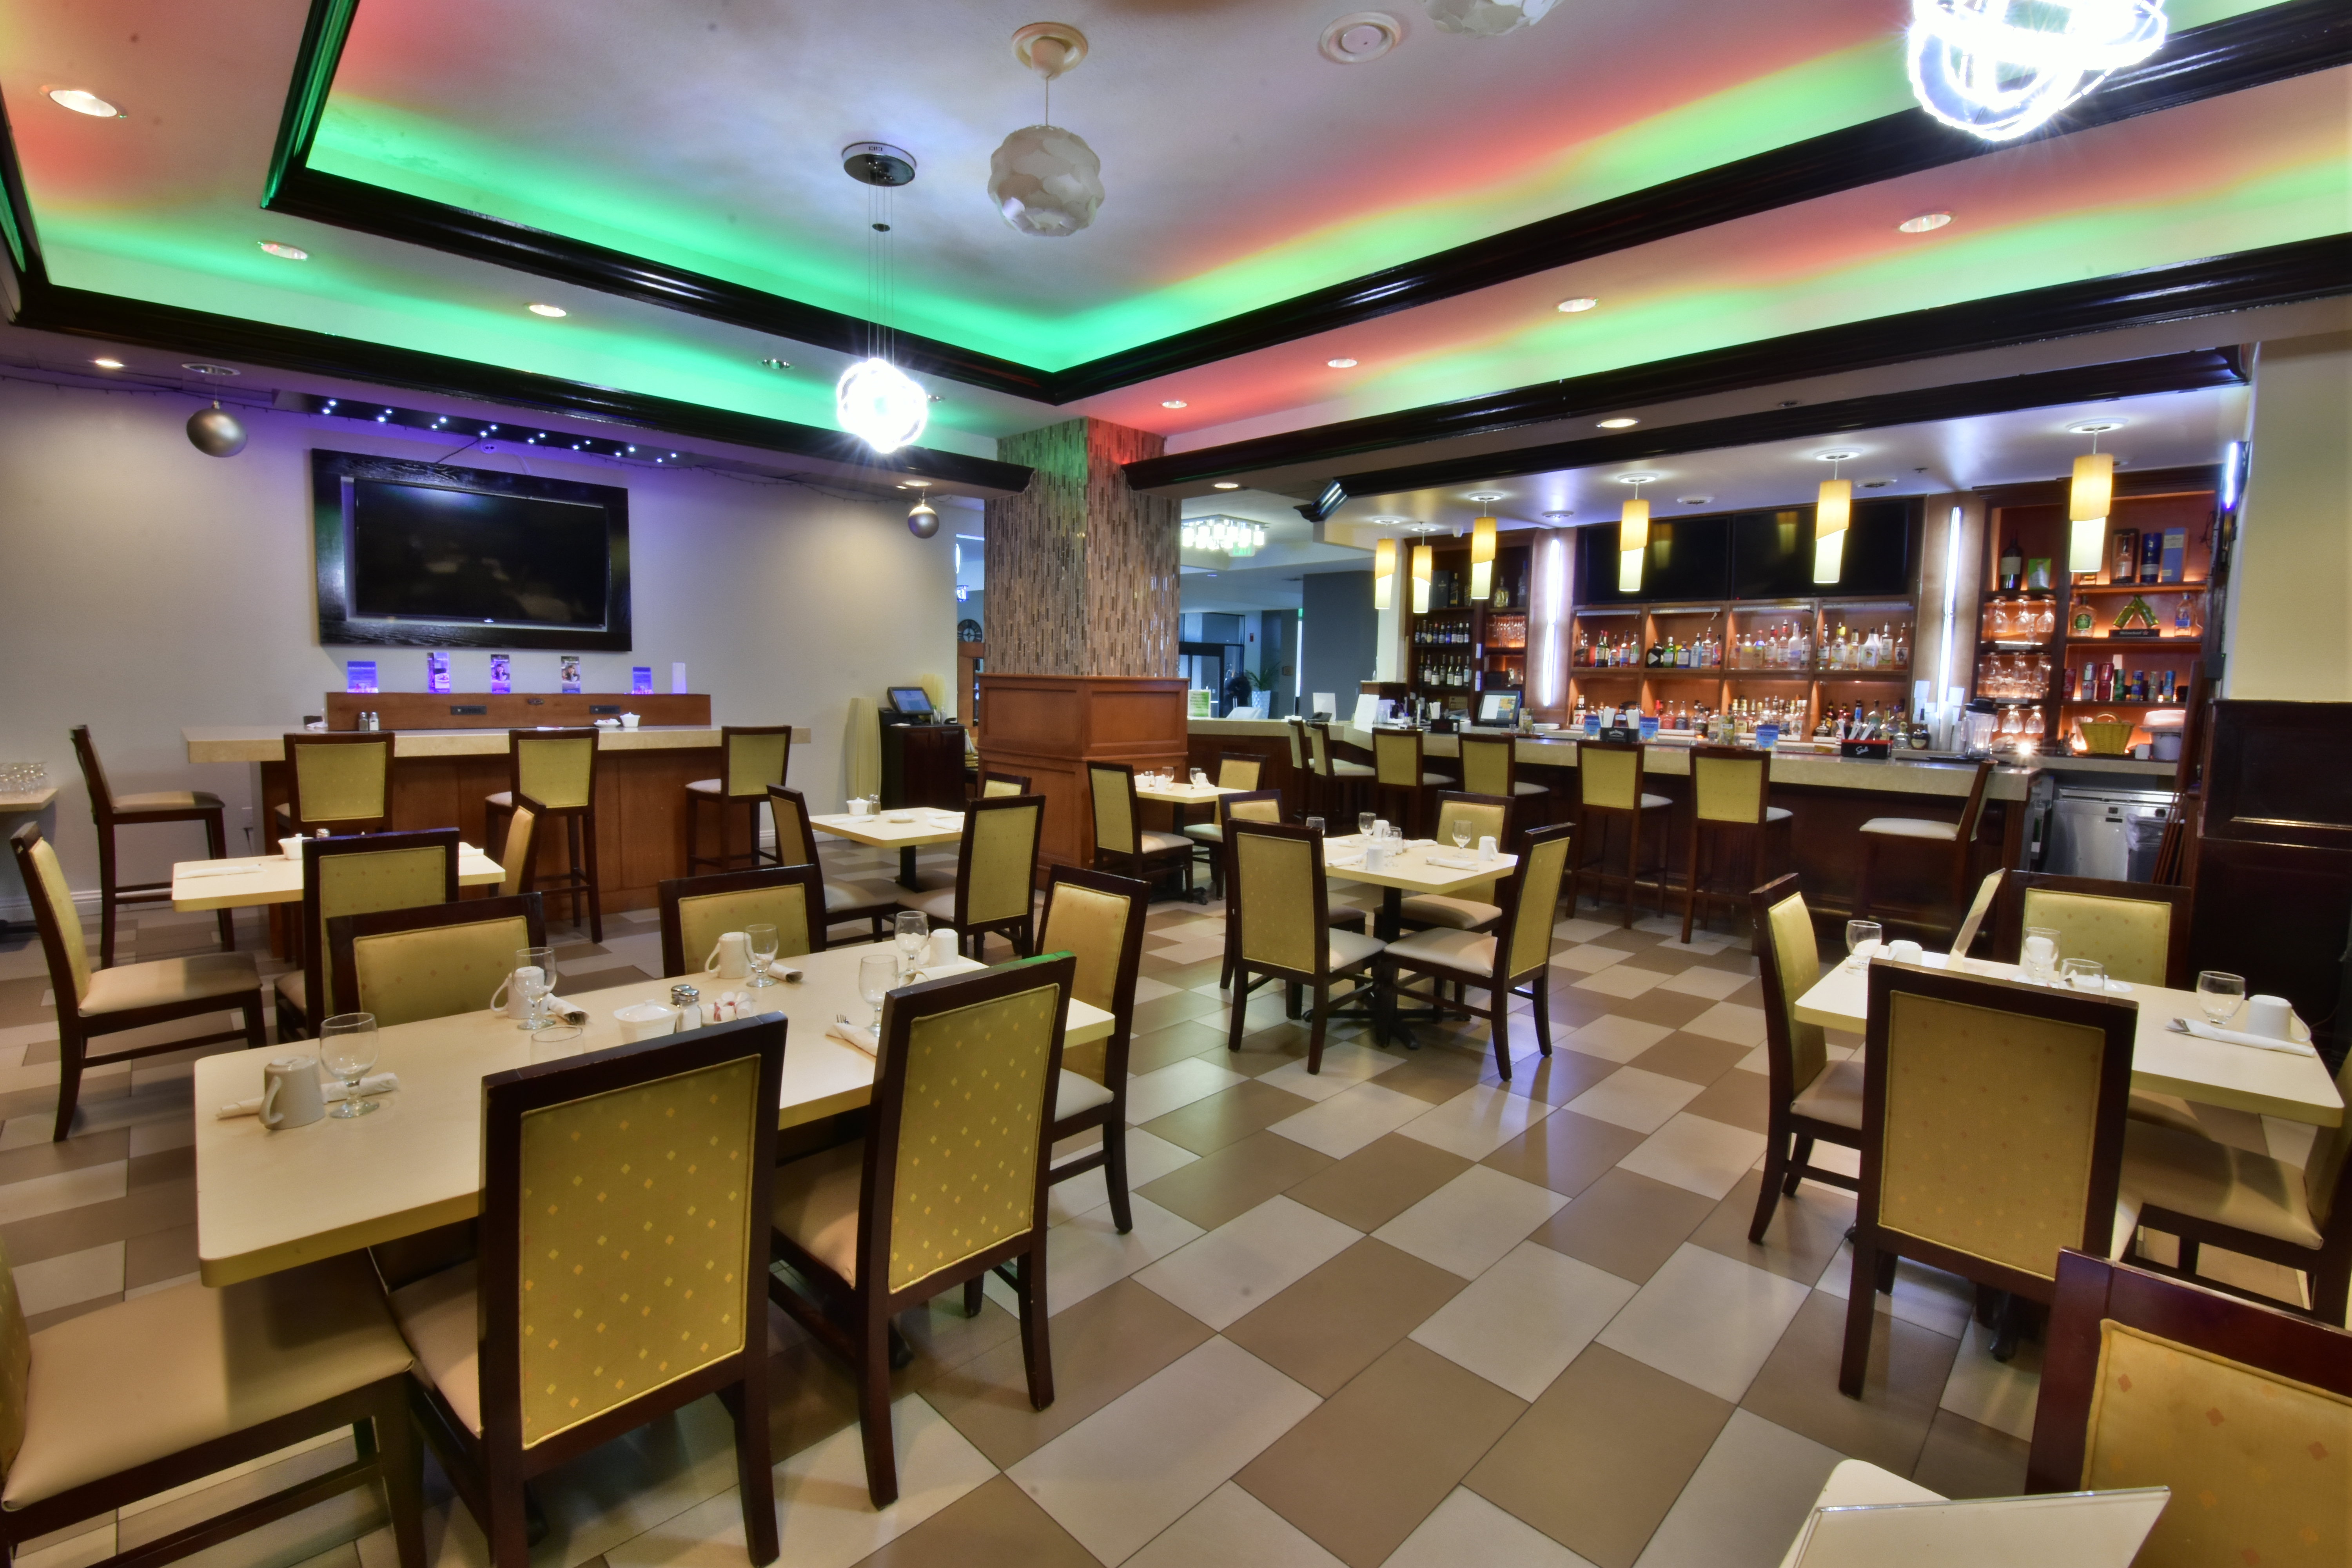 Enjoy a Delicious meal in our Restaurant!  